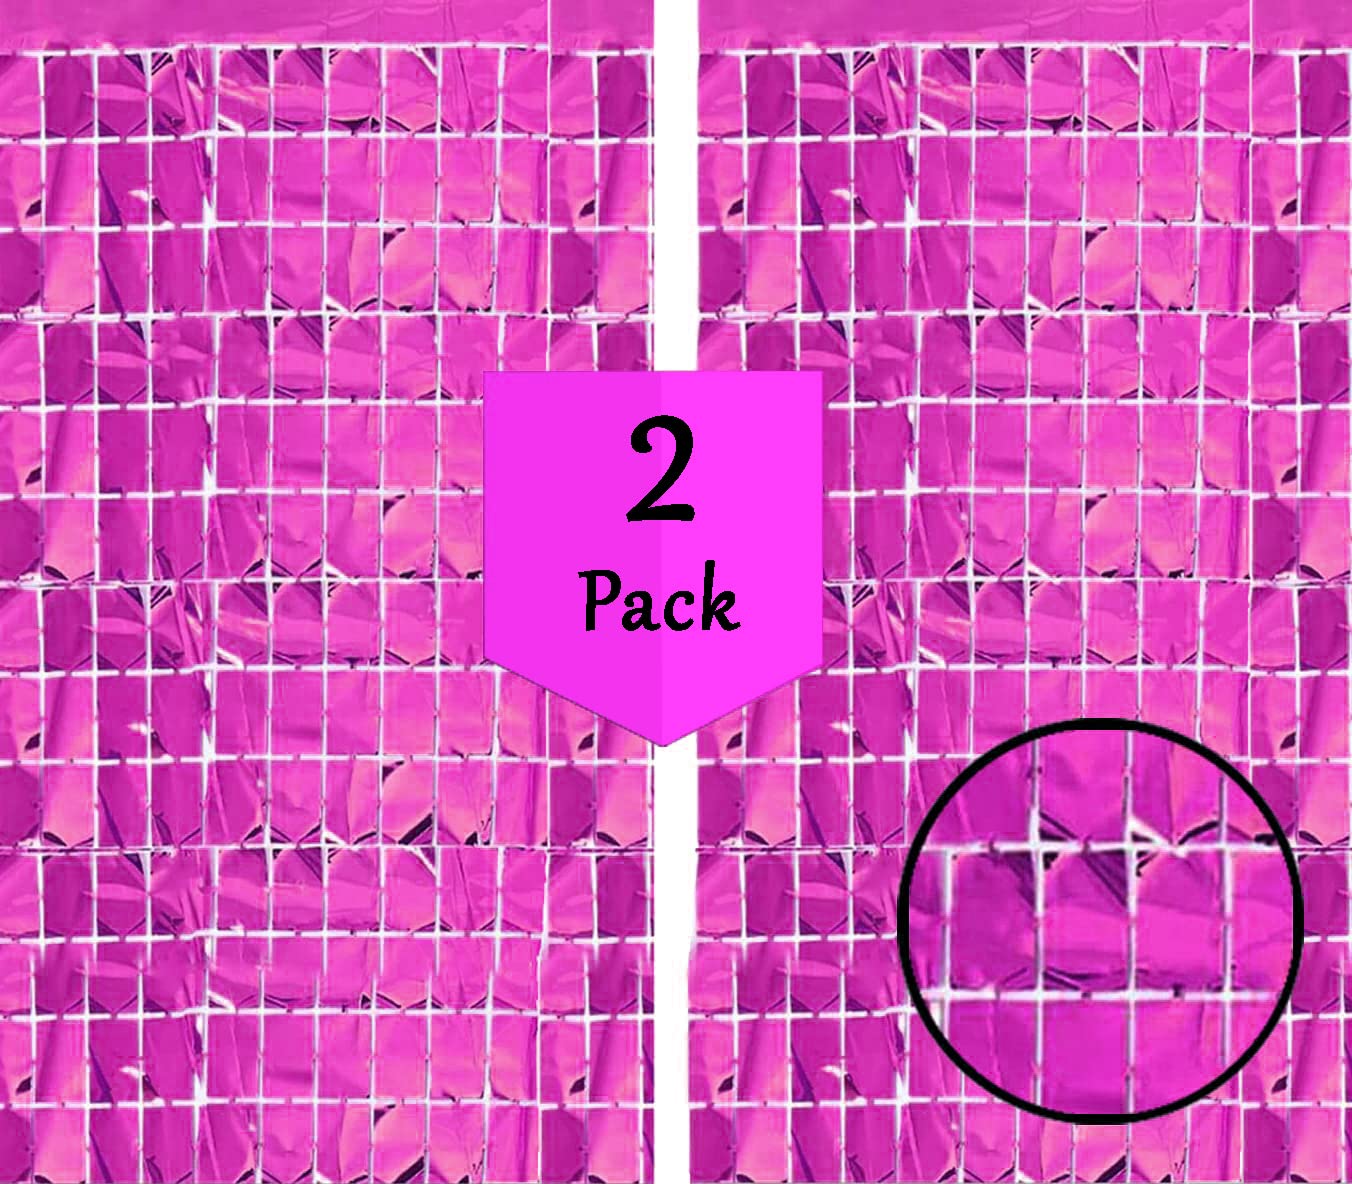 Pink Square Foil Curtains Pack of 2 Nos for Birthday Decoration Photo Booth Props Backdrop Baby Shower Bachelorette Party Decorations